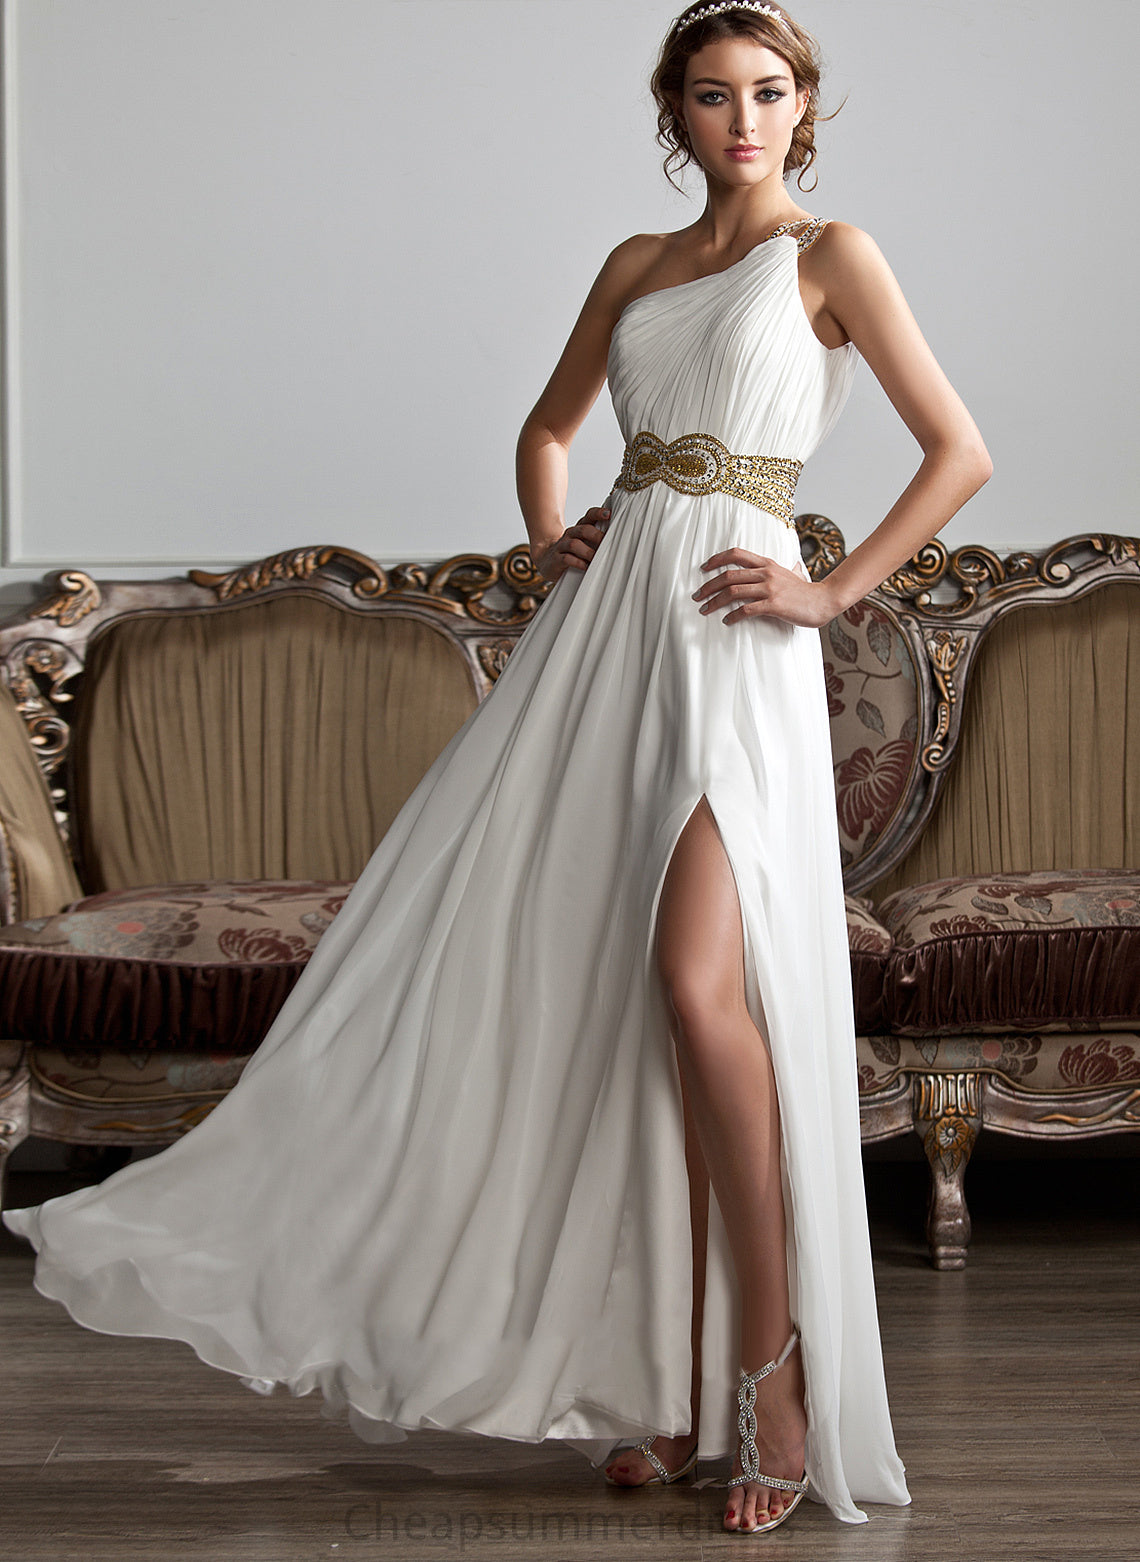 Ruffle Prom Dresses Floor-Length A-Line Beading Front Chiffon Sequins Split One-Shoulder With London